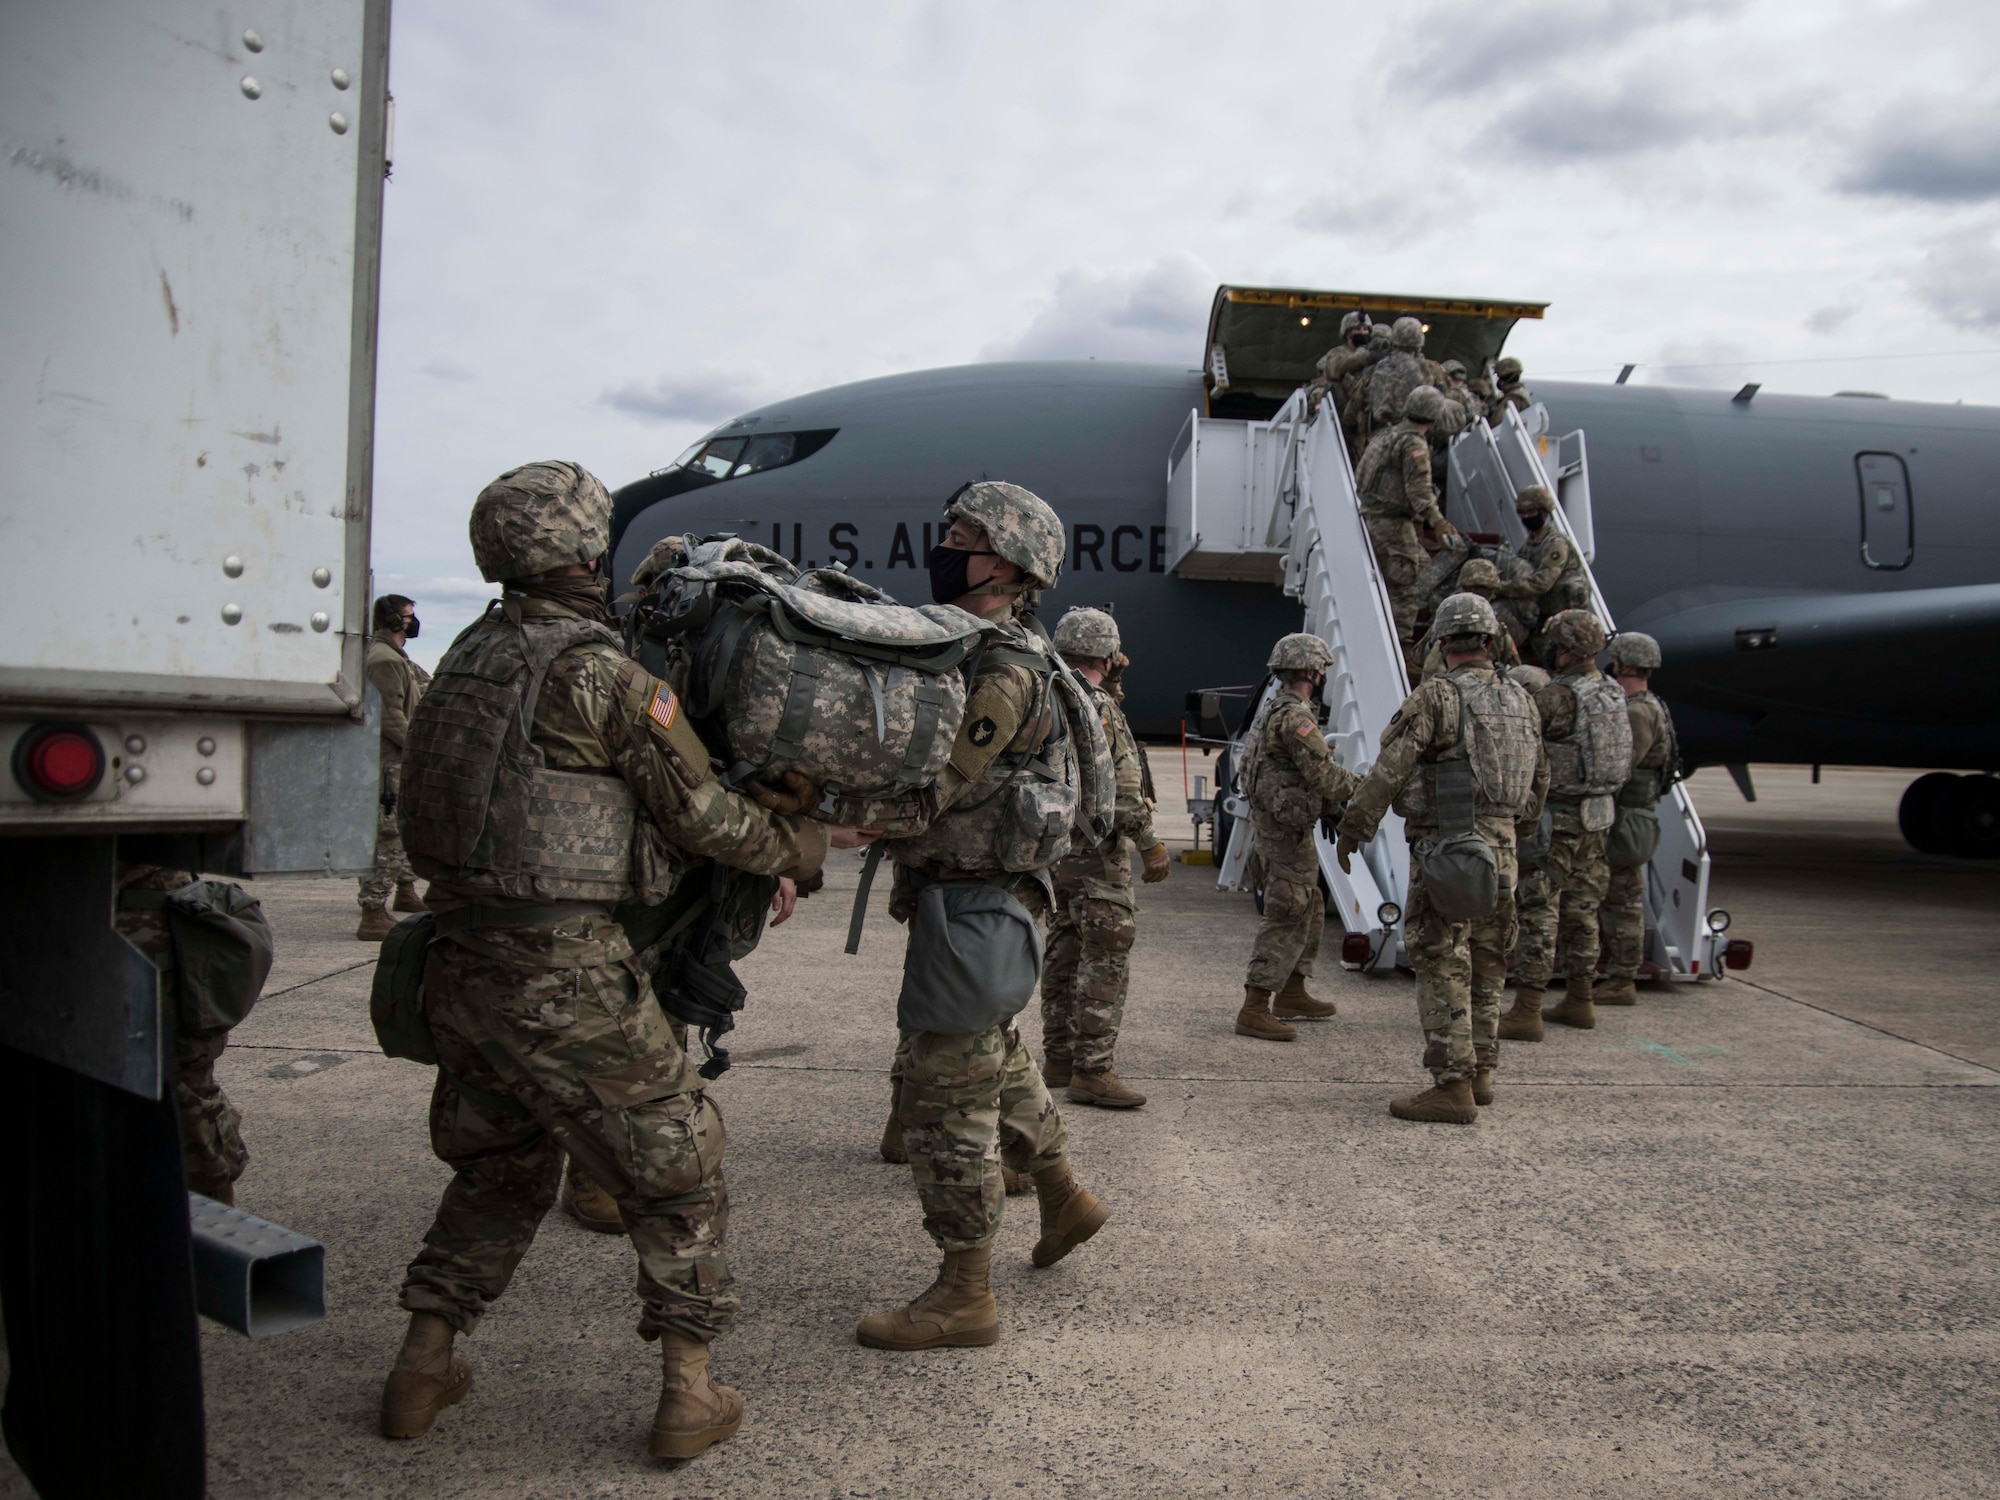 U.S. Soldiers with the Iowa National Guard unload cargo from a KC-135 Stratotanker upon arrival to Joint Base Andrews, Maryland, Jan. 18, 2021. At least 25,000 National Guard men and women have been authorized to conduct security, communication and logistical missions in support of federal and District authorities leading up and through the 59th Presidential Inauguration. (U.S. Air National Guard photo by Tech. Sgt. Morgan R. Whitehouse)